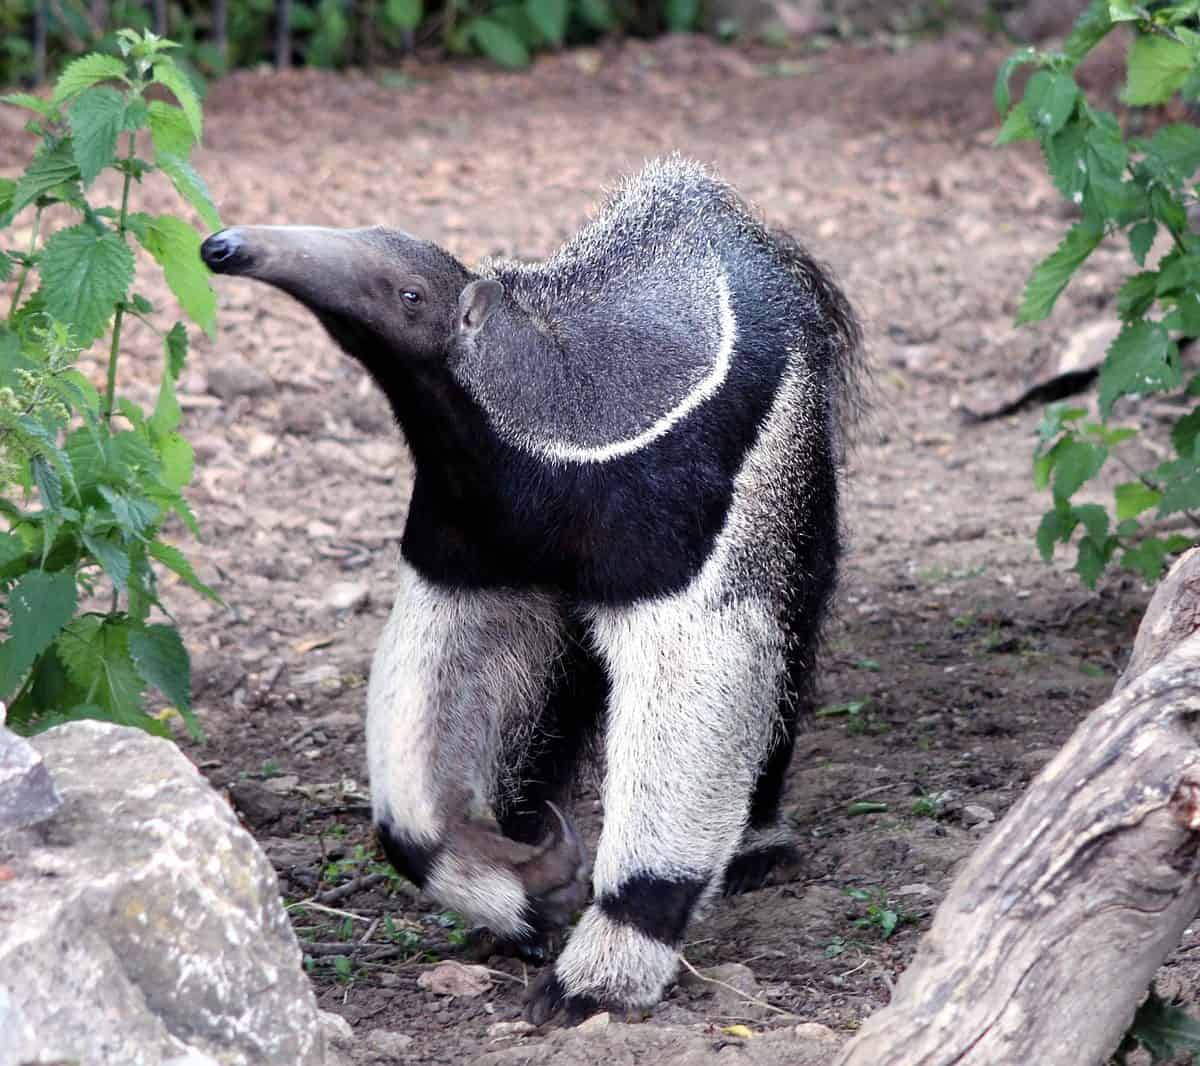 Costa Rica Wildlife - Help Me Find the Giant Anteater :